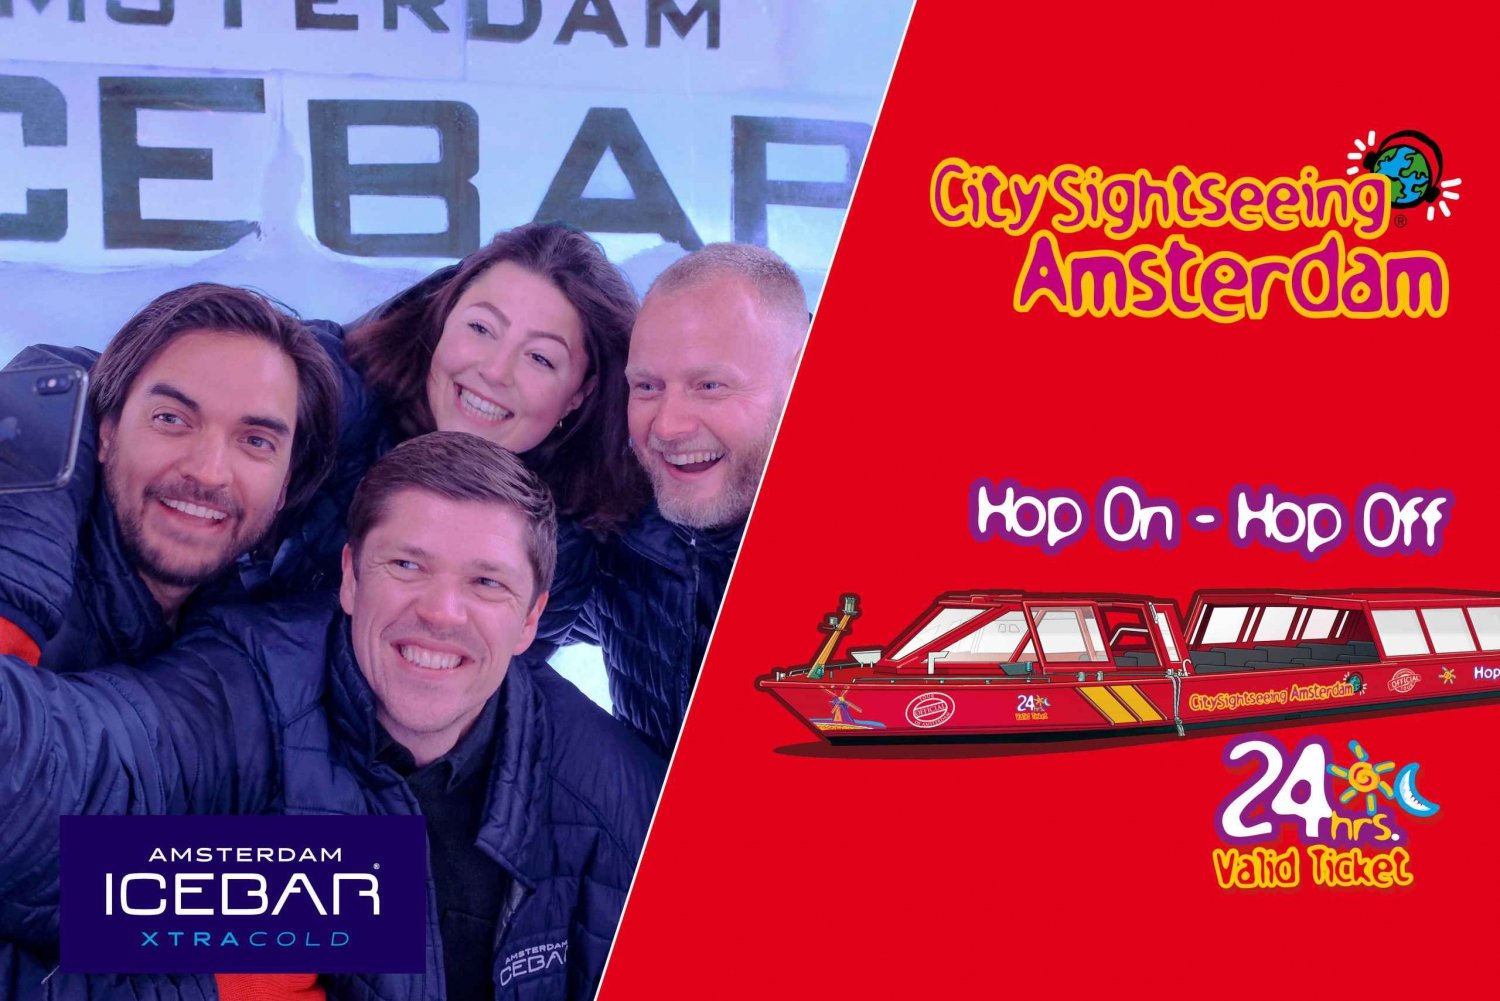 Amsterdam: 24 ore in barca hop-on hop-off e XtraCold Icebar